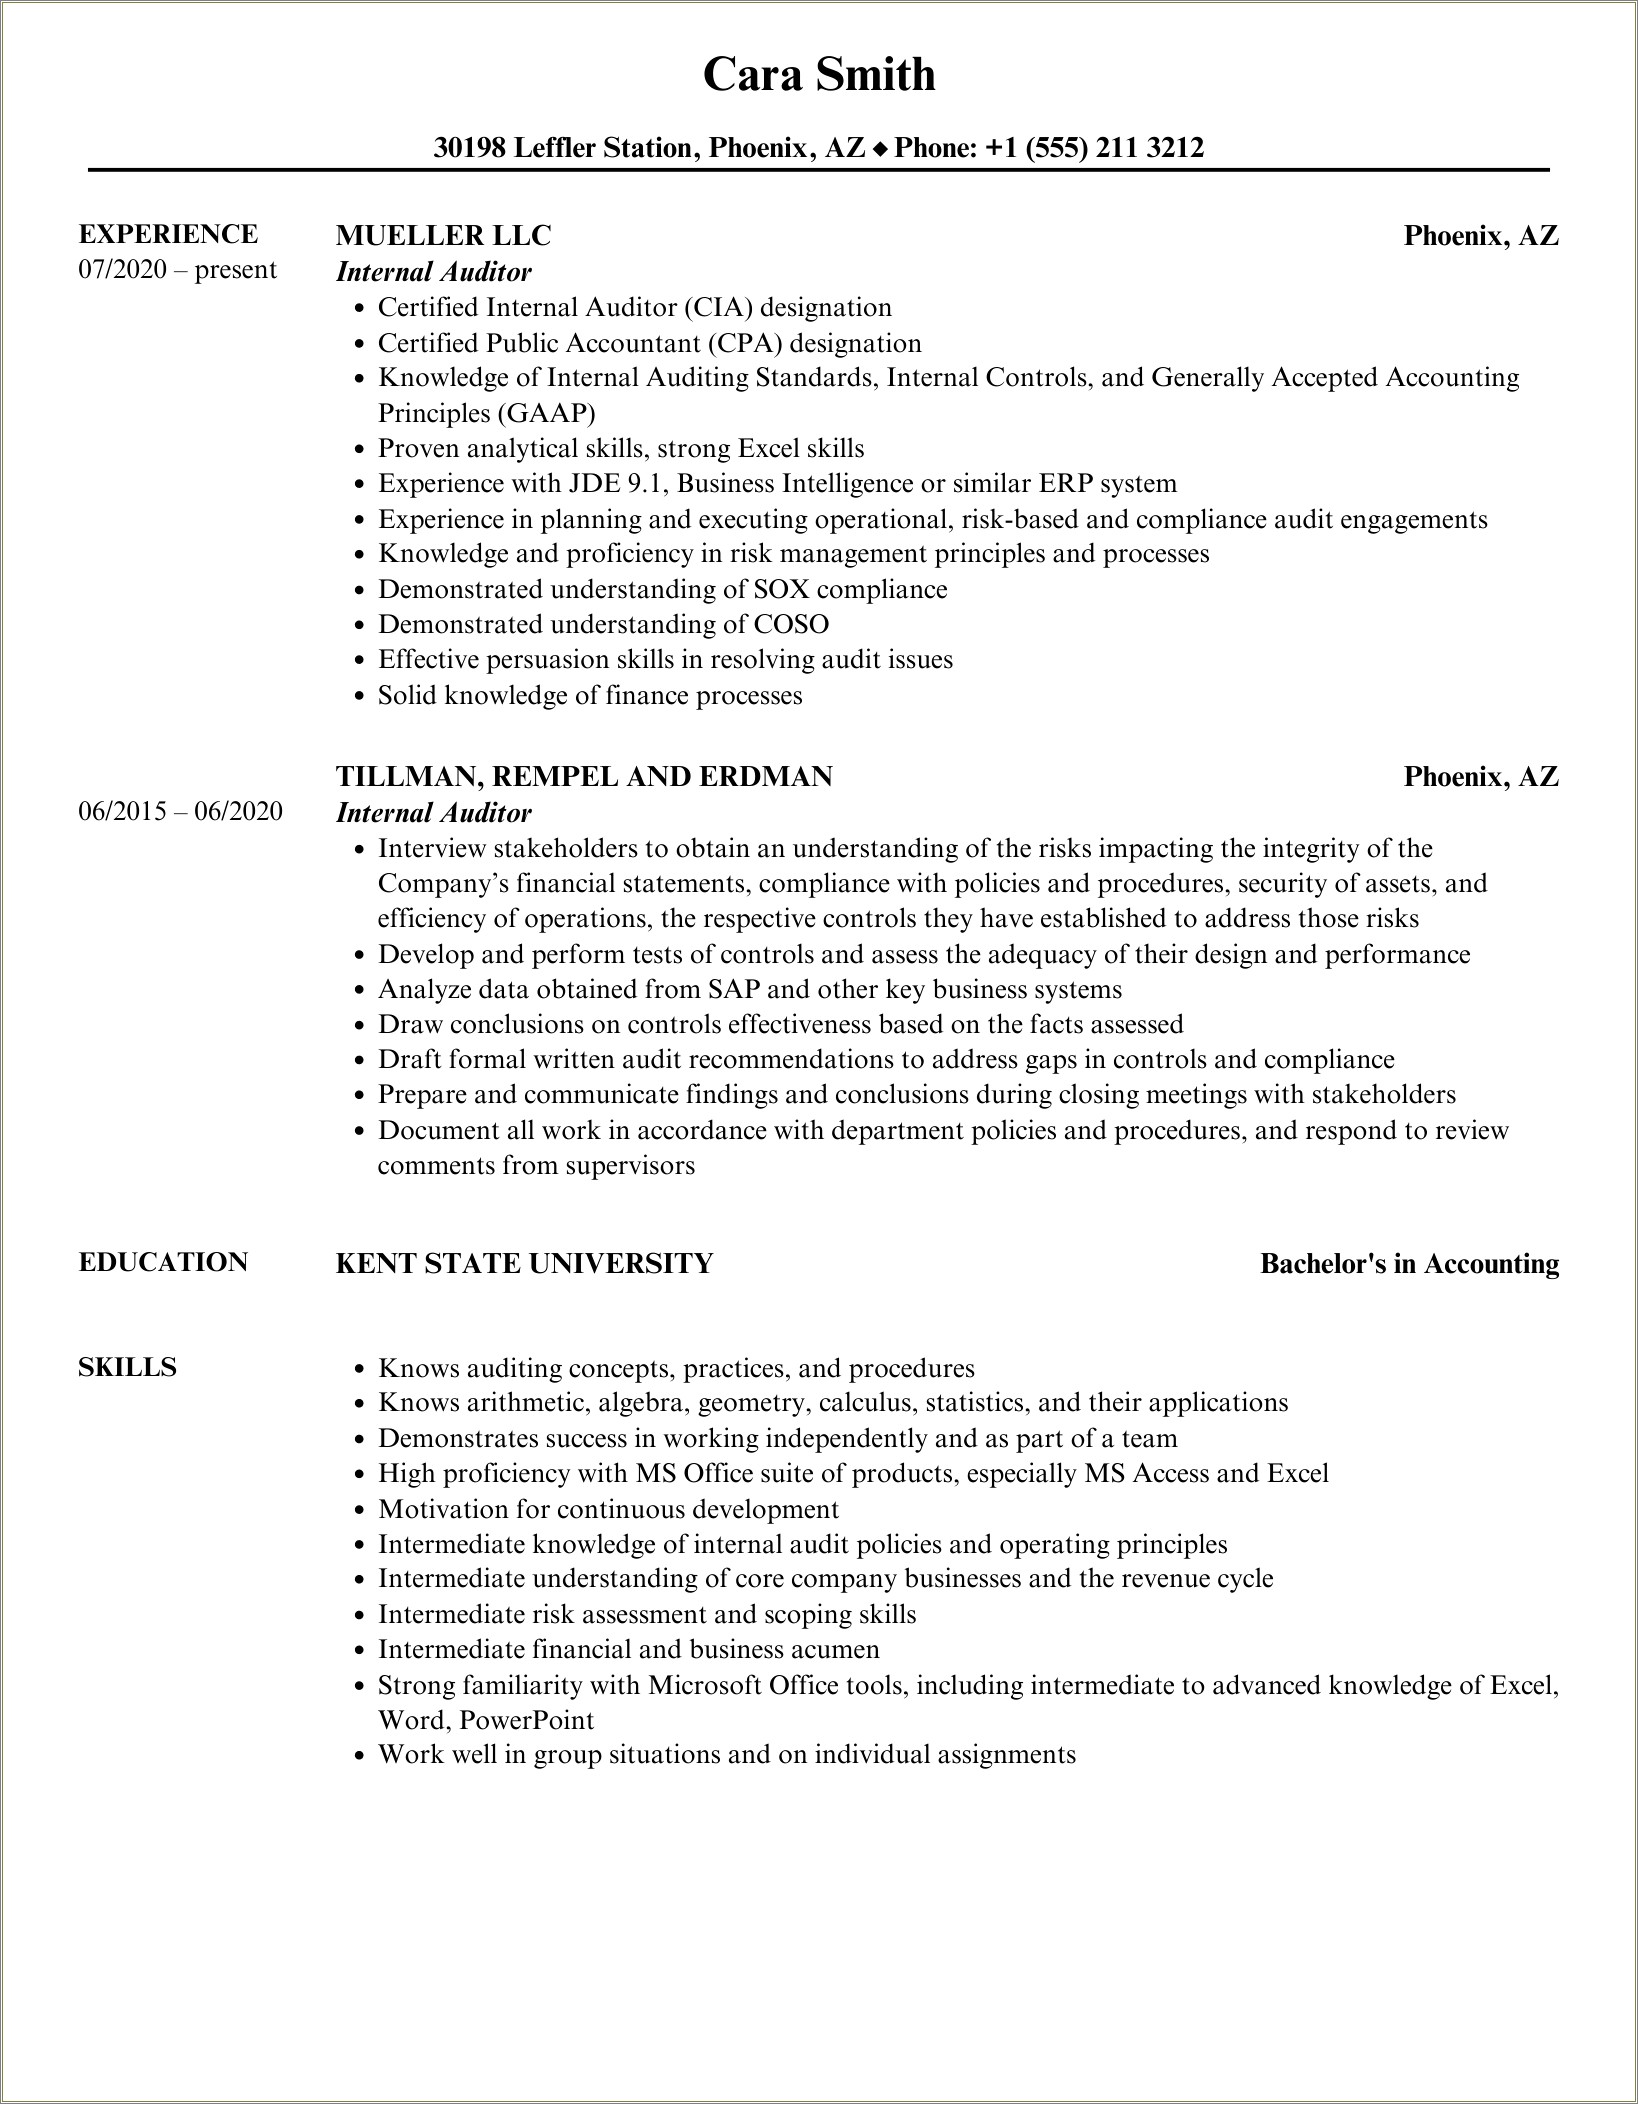 Resume Summary Examples For Internal Auditor